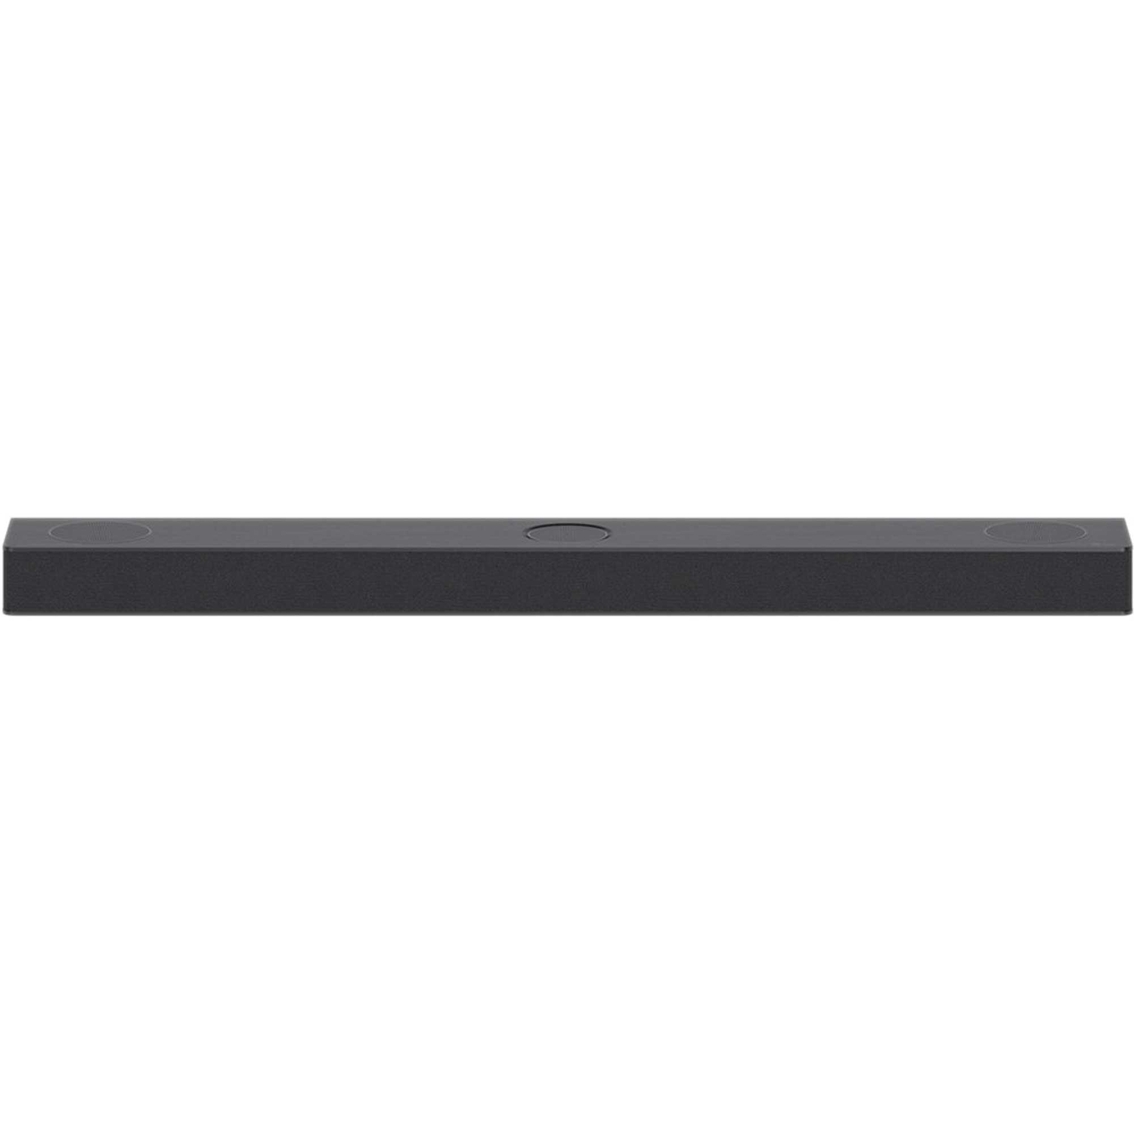 LG S80QY 3.1.2 Channel 480W High Res Sound Bar with Dolby Atmos and Apple Airplay 2 - Image 3 of 8